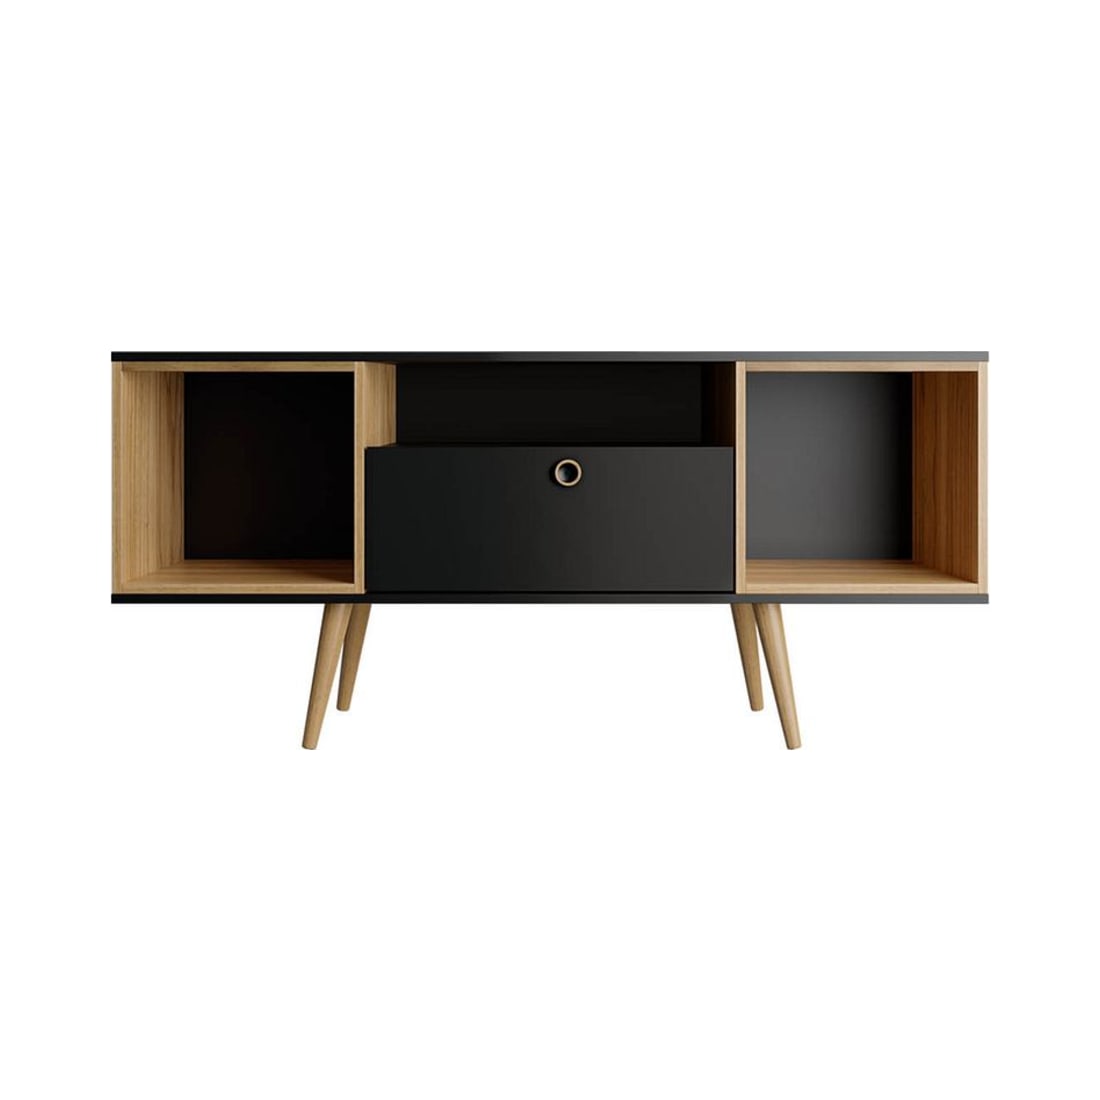 Theodore 53.14” TV Stand in Black and Cinnamon Light Brown